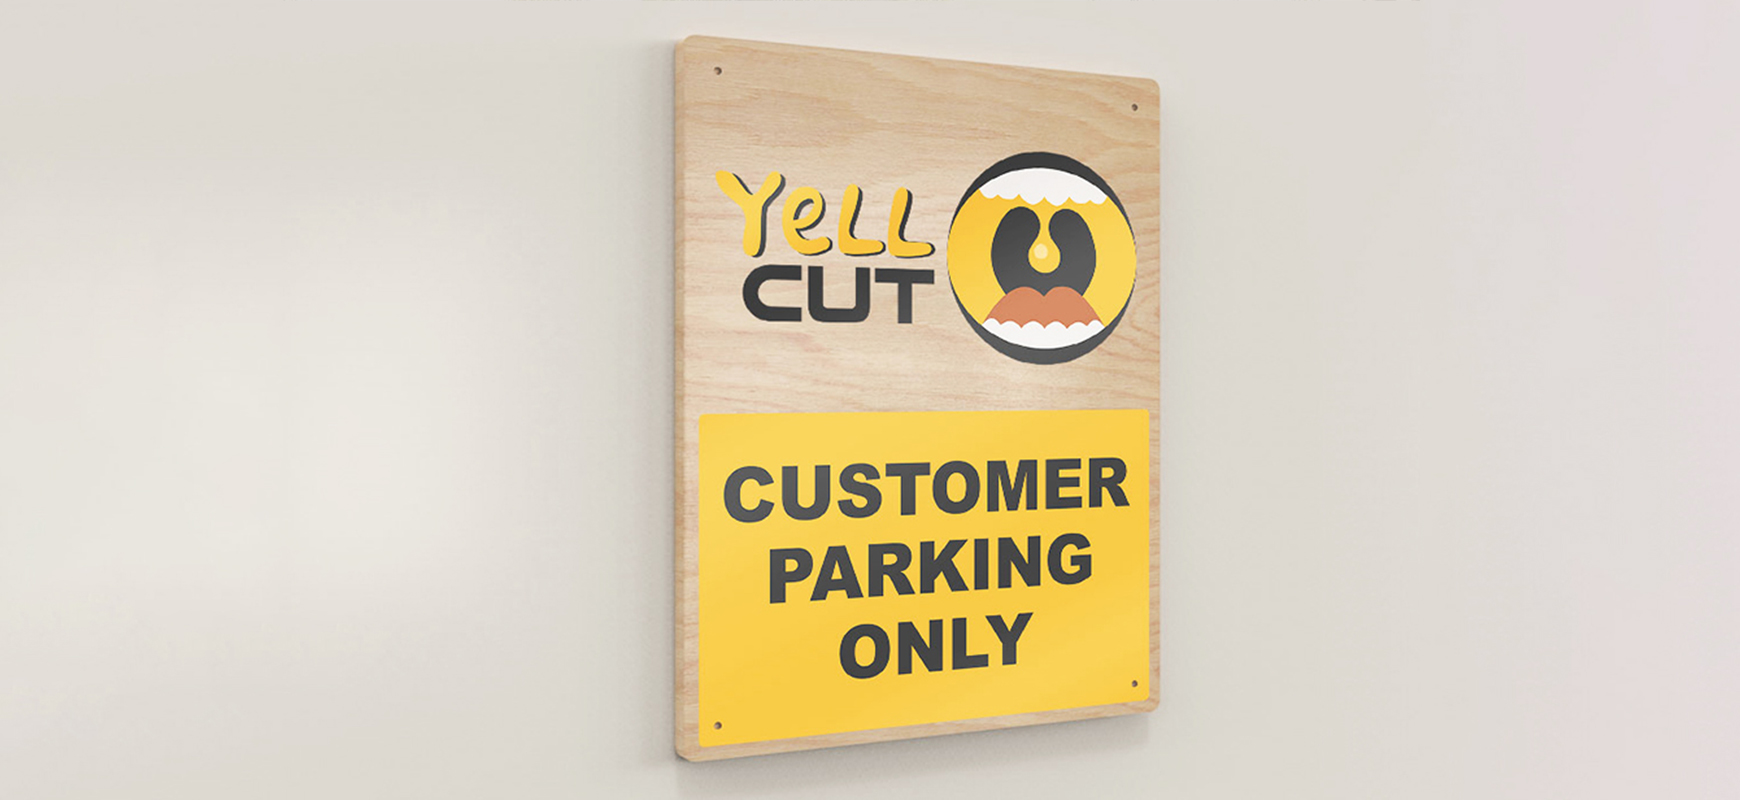 Yell Cut colorful wayfinding signage design for the parking area